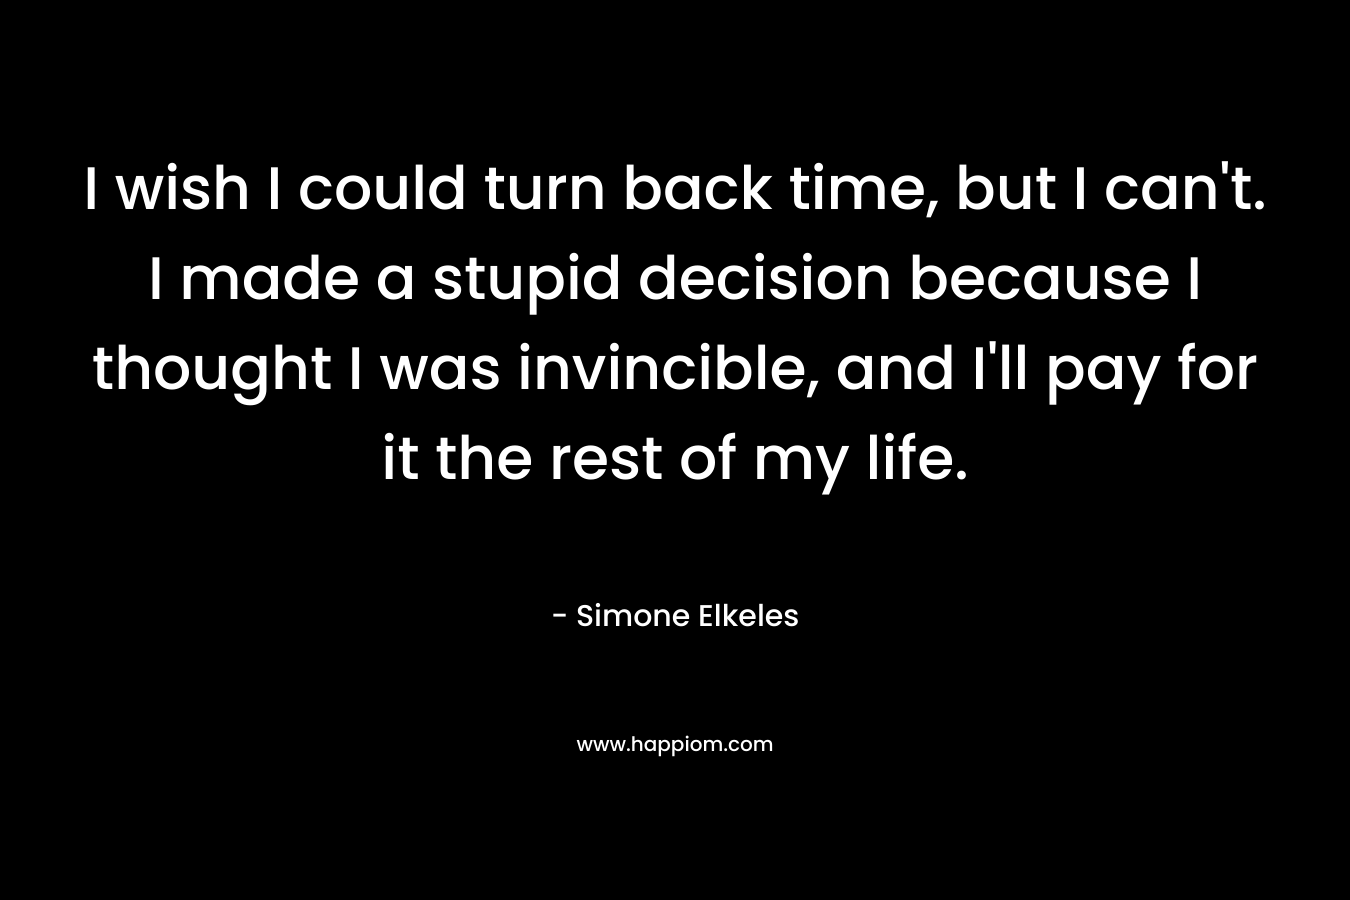 I wish I could turn back time, but I can’t. I made a stupid decision because I thought I was invincible, and I’ll pay for it the rest of my life. – Simone Elkeles